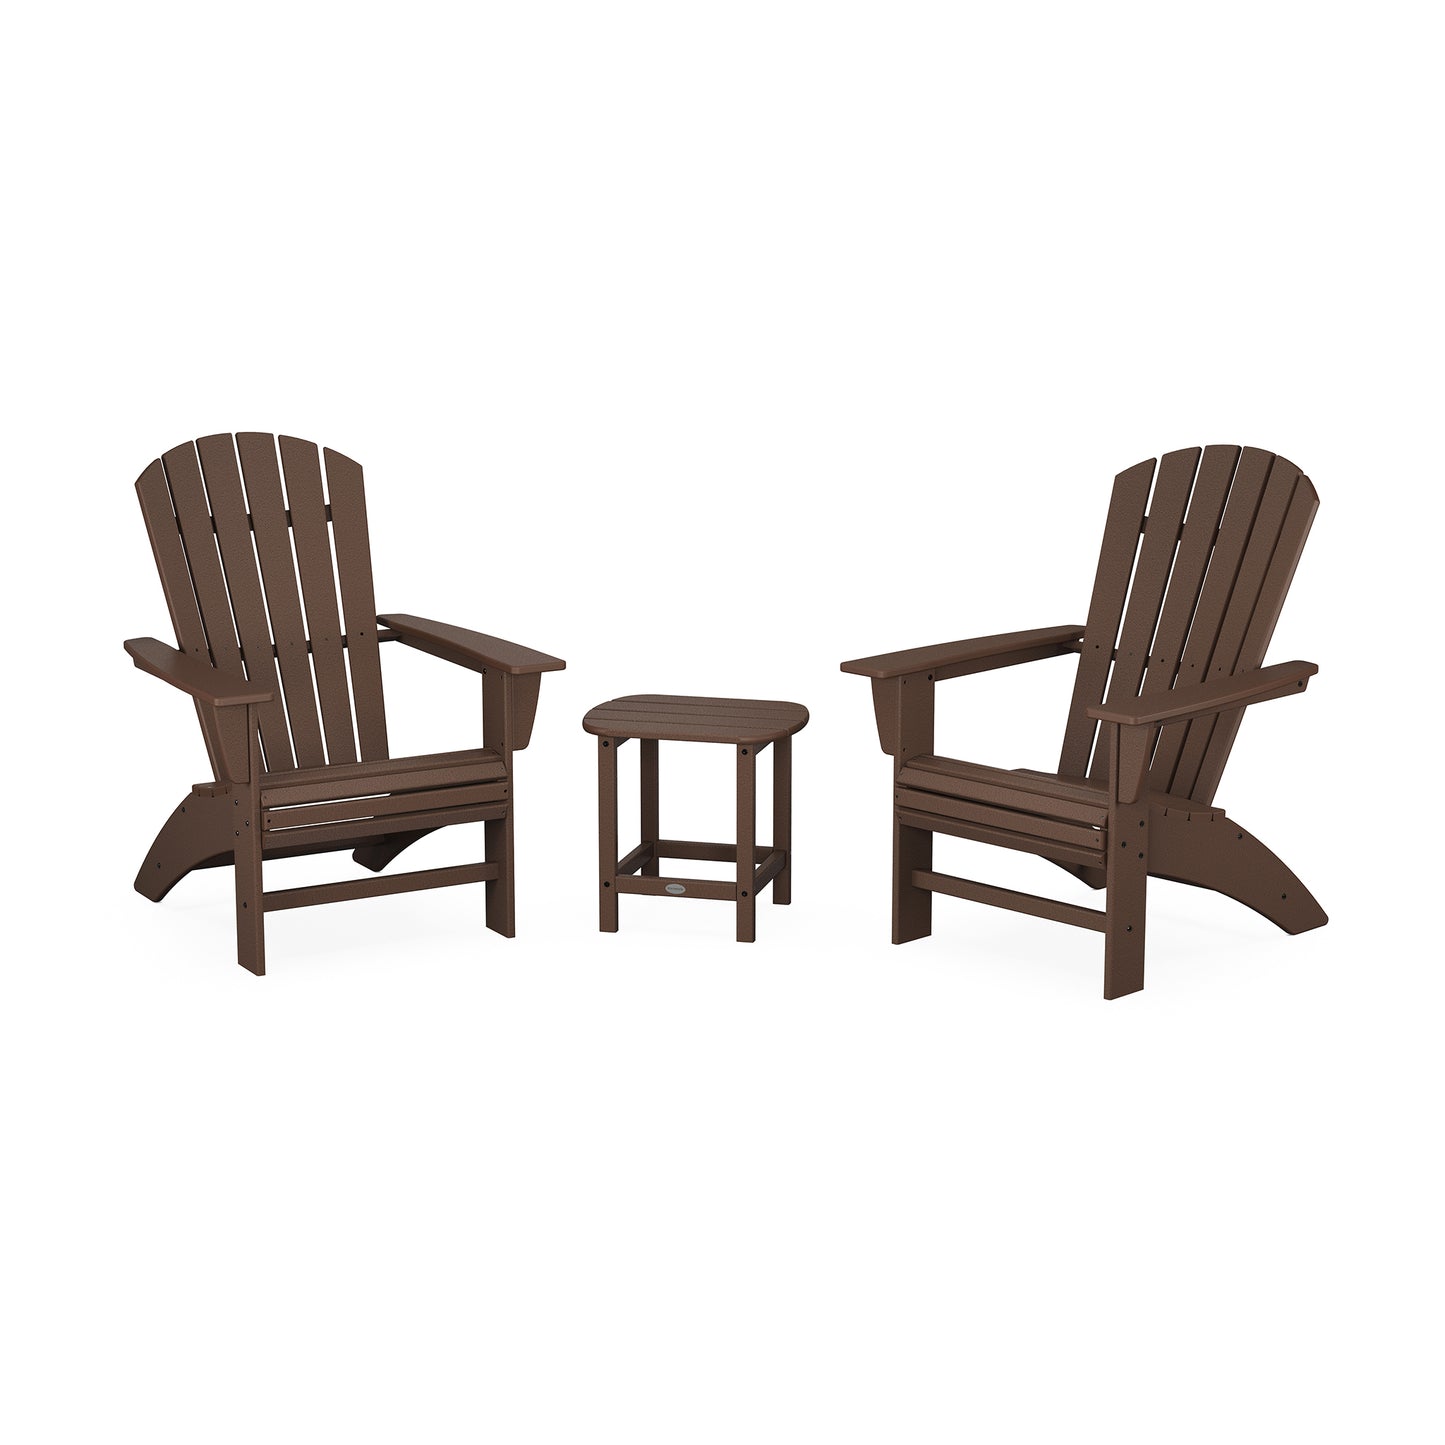 Two brown POLYWOOD Nautical Curveback Adirondack chairs with a matching small side table, arranged on a plain white background.